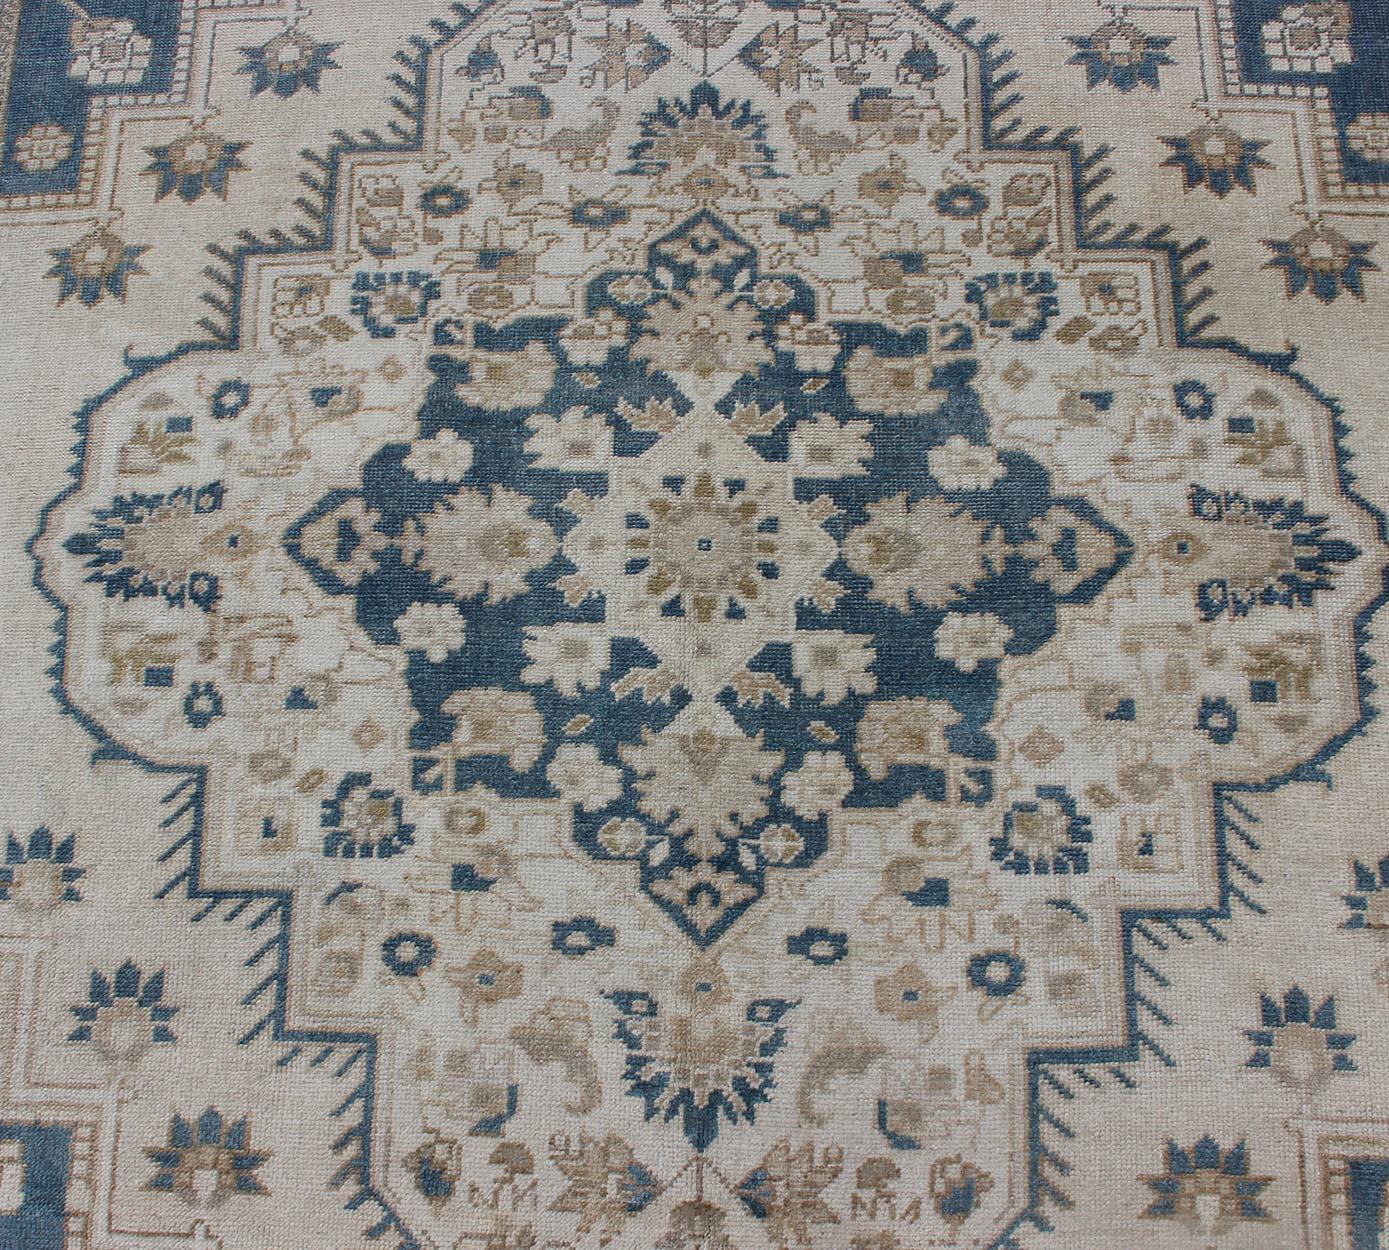 Vintage Turkish Oushak Rug with Geometric Design in Blue, Taupe and Sand For Sale 6